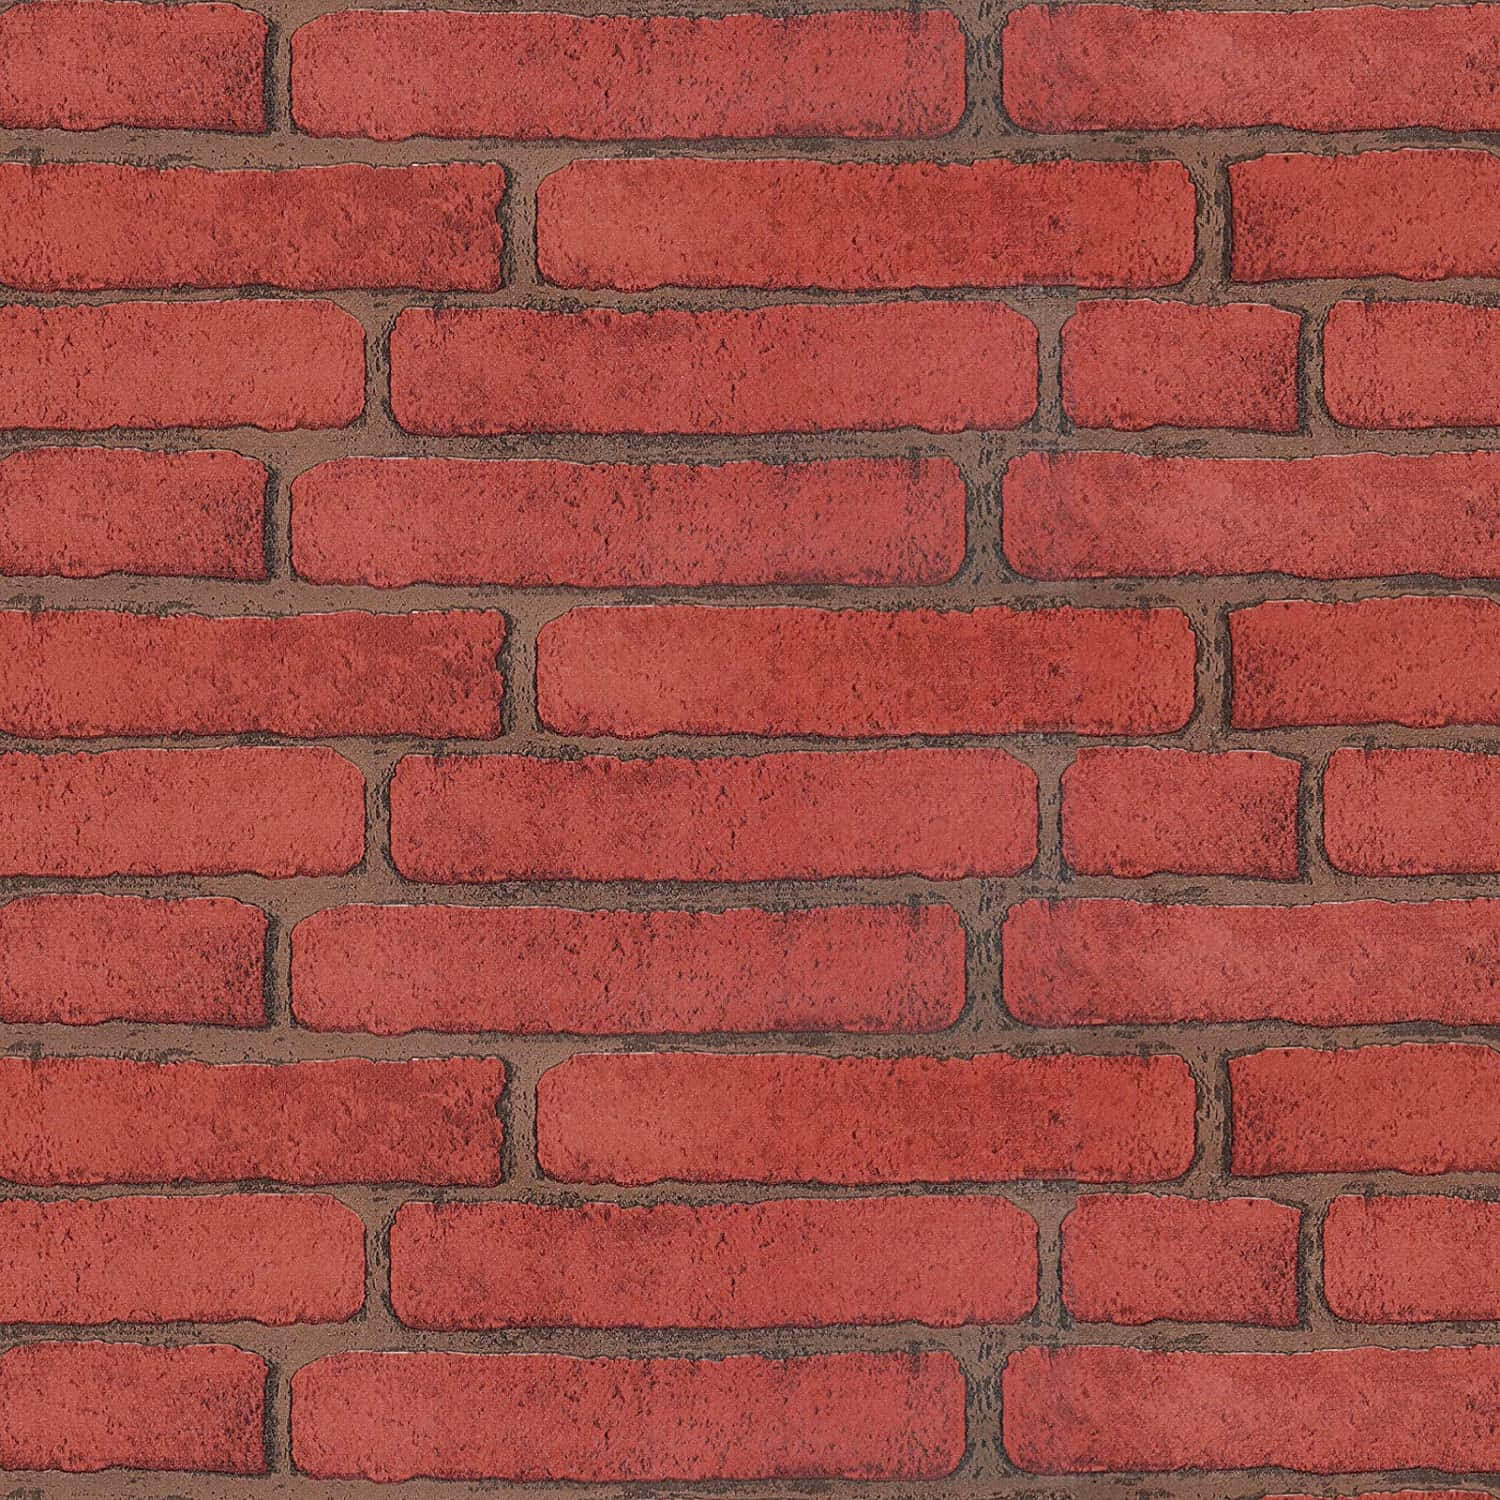 Traditional Aesthetics: Red Brick Wall Texture.